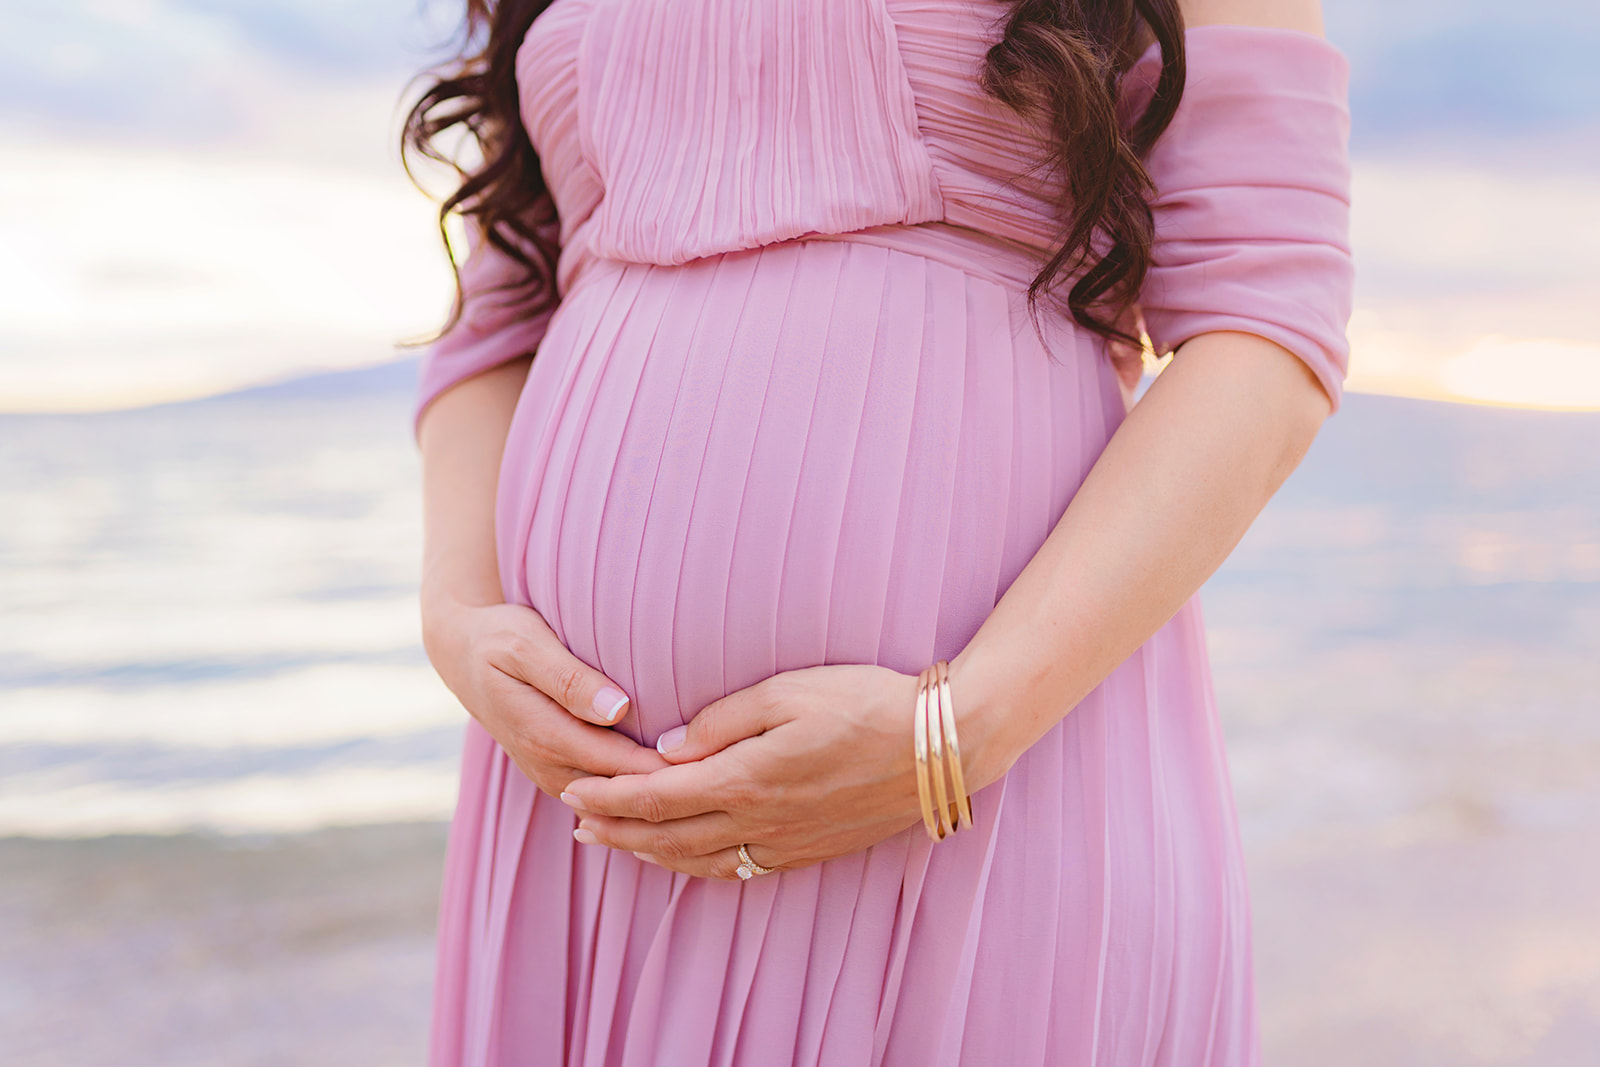 detail shot of a woman holding her baby bump from underneath in a pink dress and wearing gold bangles around her wrist